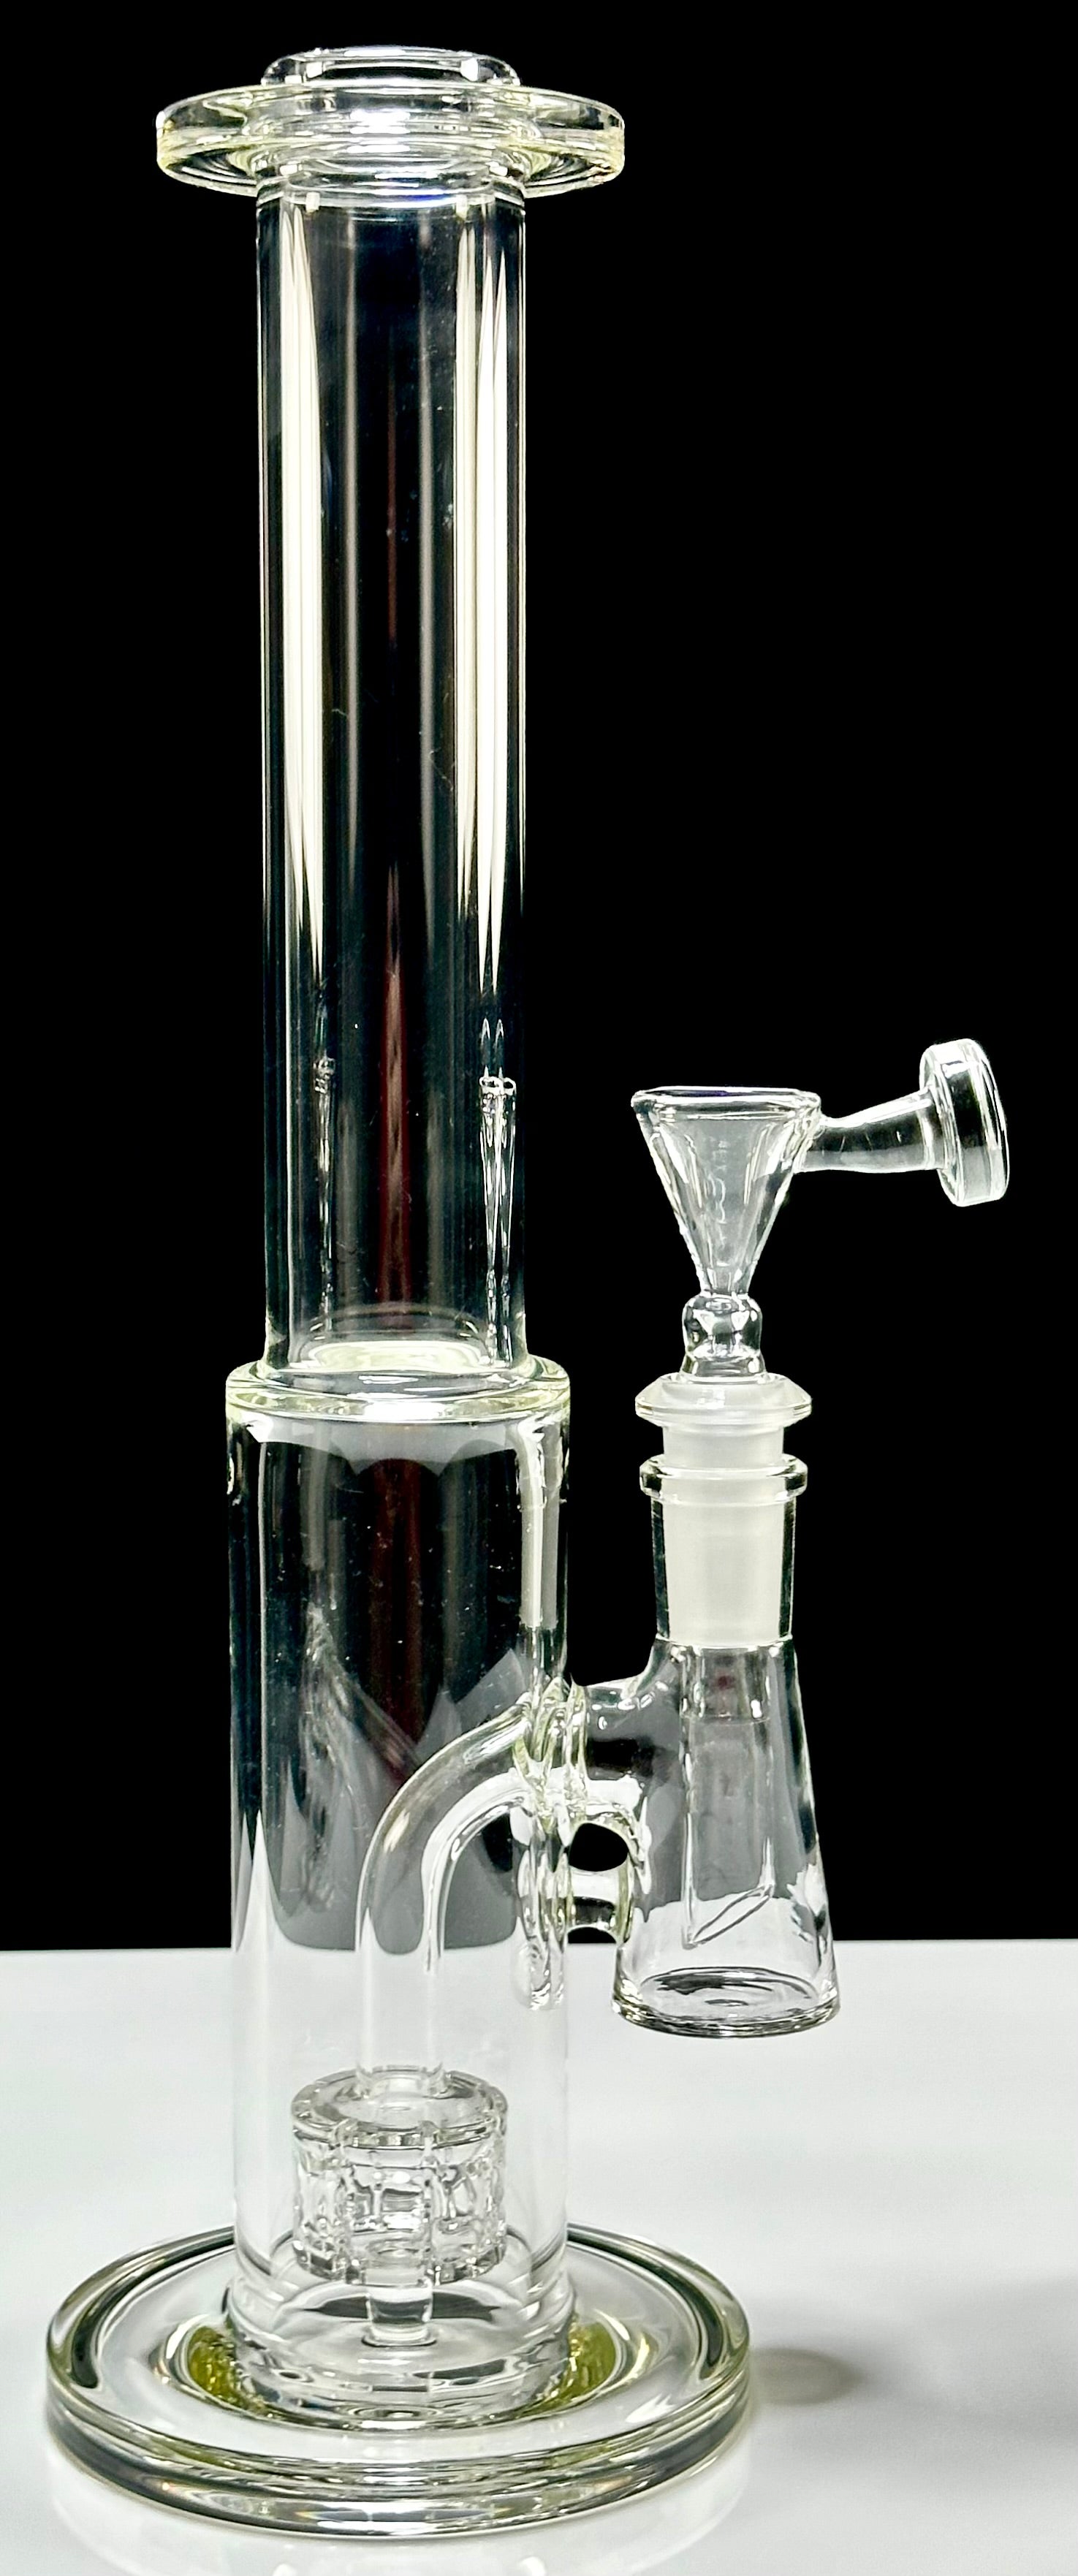 Williams Glass Scepter 14mm with Built-In Dry Catcher